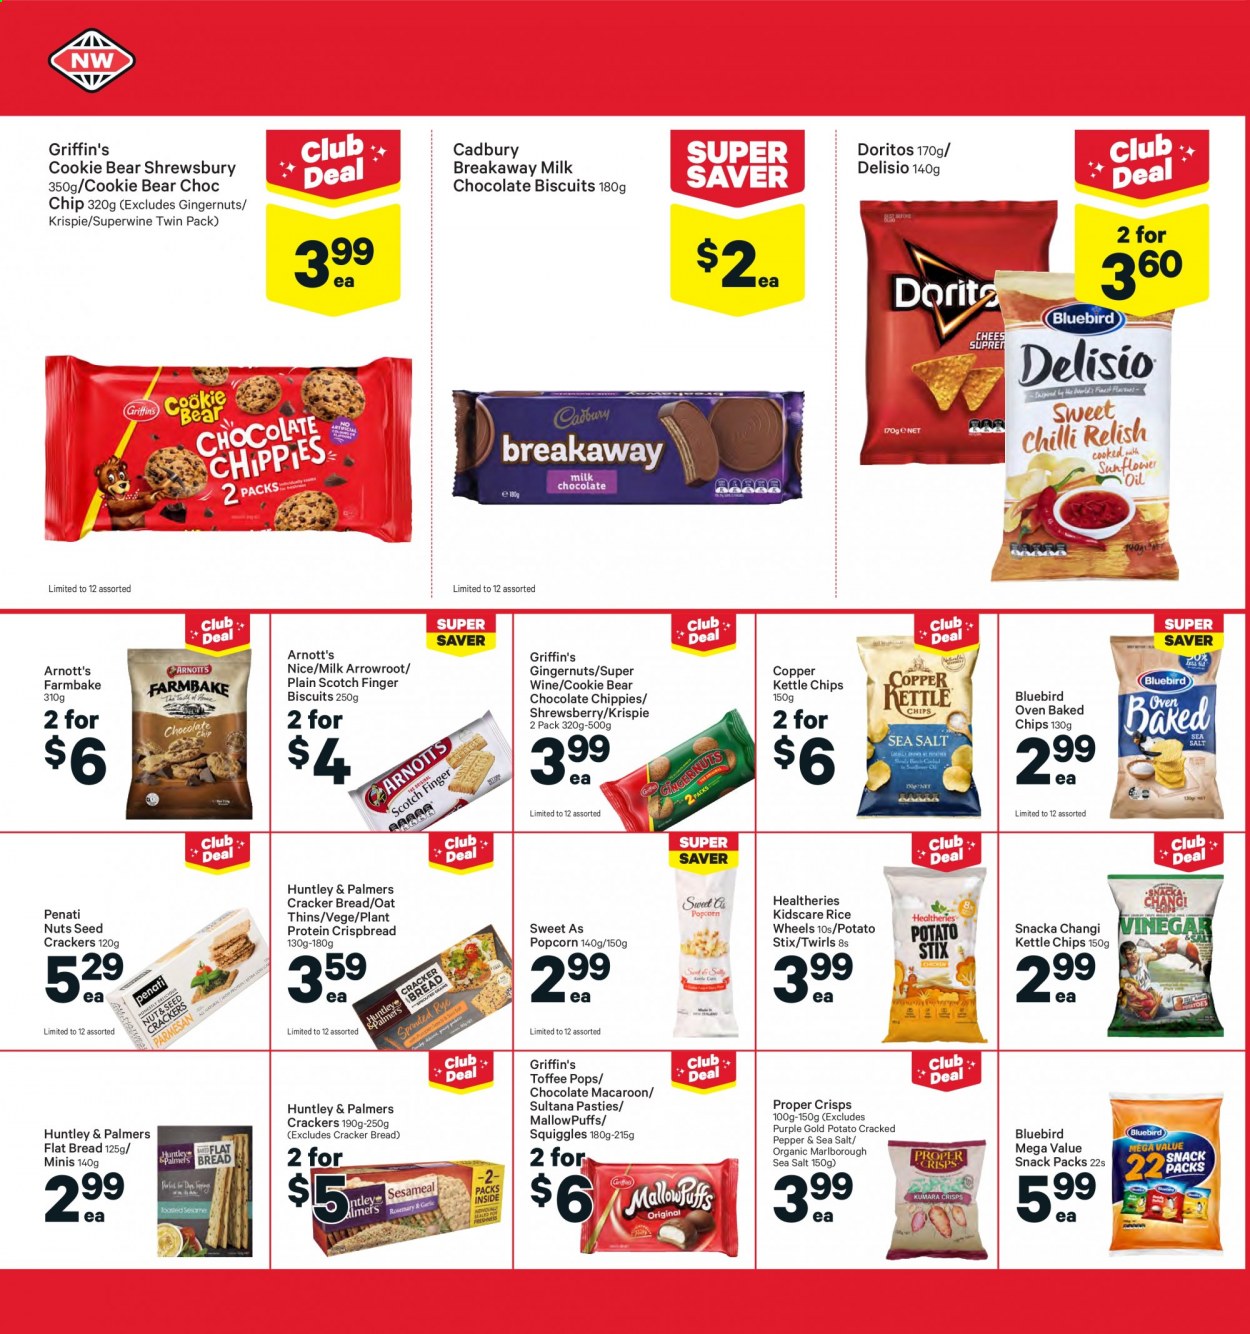 thumbnail - New World mailer - 26.07.2021 - 01.08.2021 - Sales products - bread, crispbread, milk chocolate, chocolate, snack, toffee, crackers, biscuit, Cadbury, MallowPuffs, Griffin's, Doritos, chips, Thins, Bluebird, popcorn, Delisio, Copper Kettle, oats, plant protein, rice, wine. Page 16.